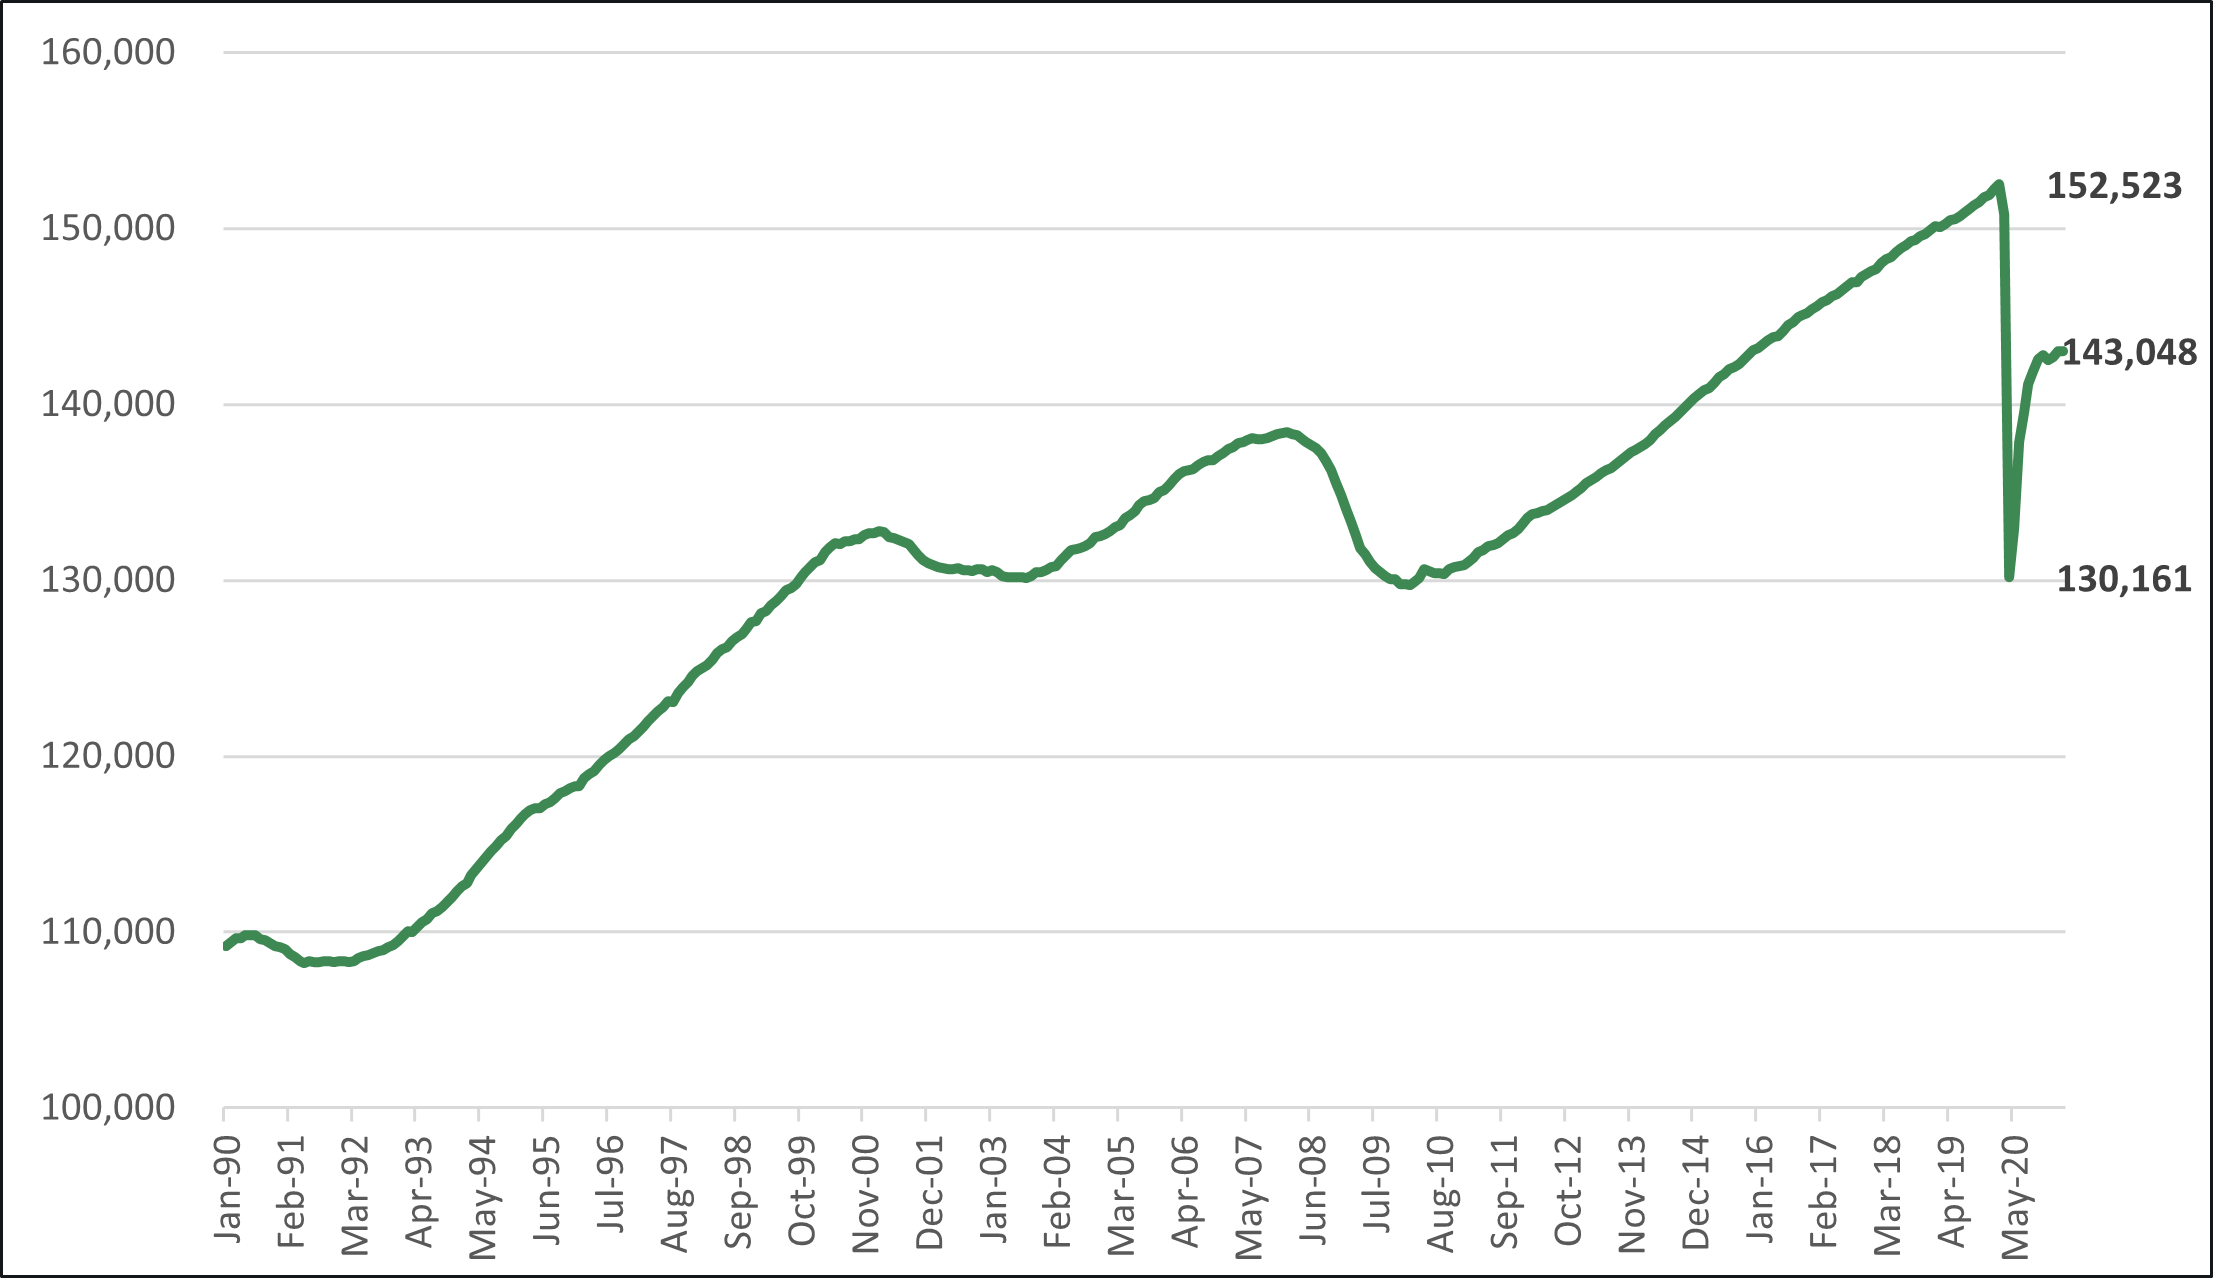 Graph depicting Total Non-Farm US Payrolls (millions) from January 1990 to May 2020